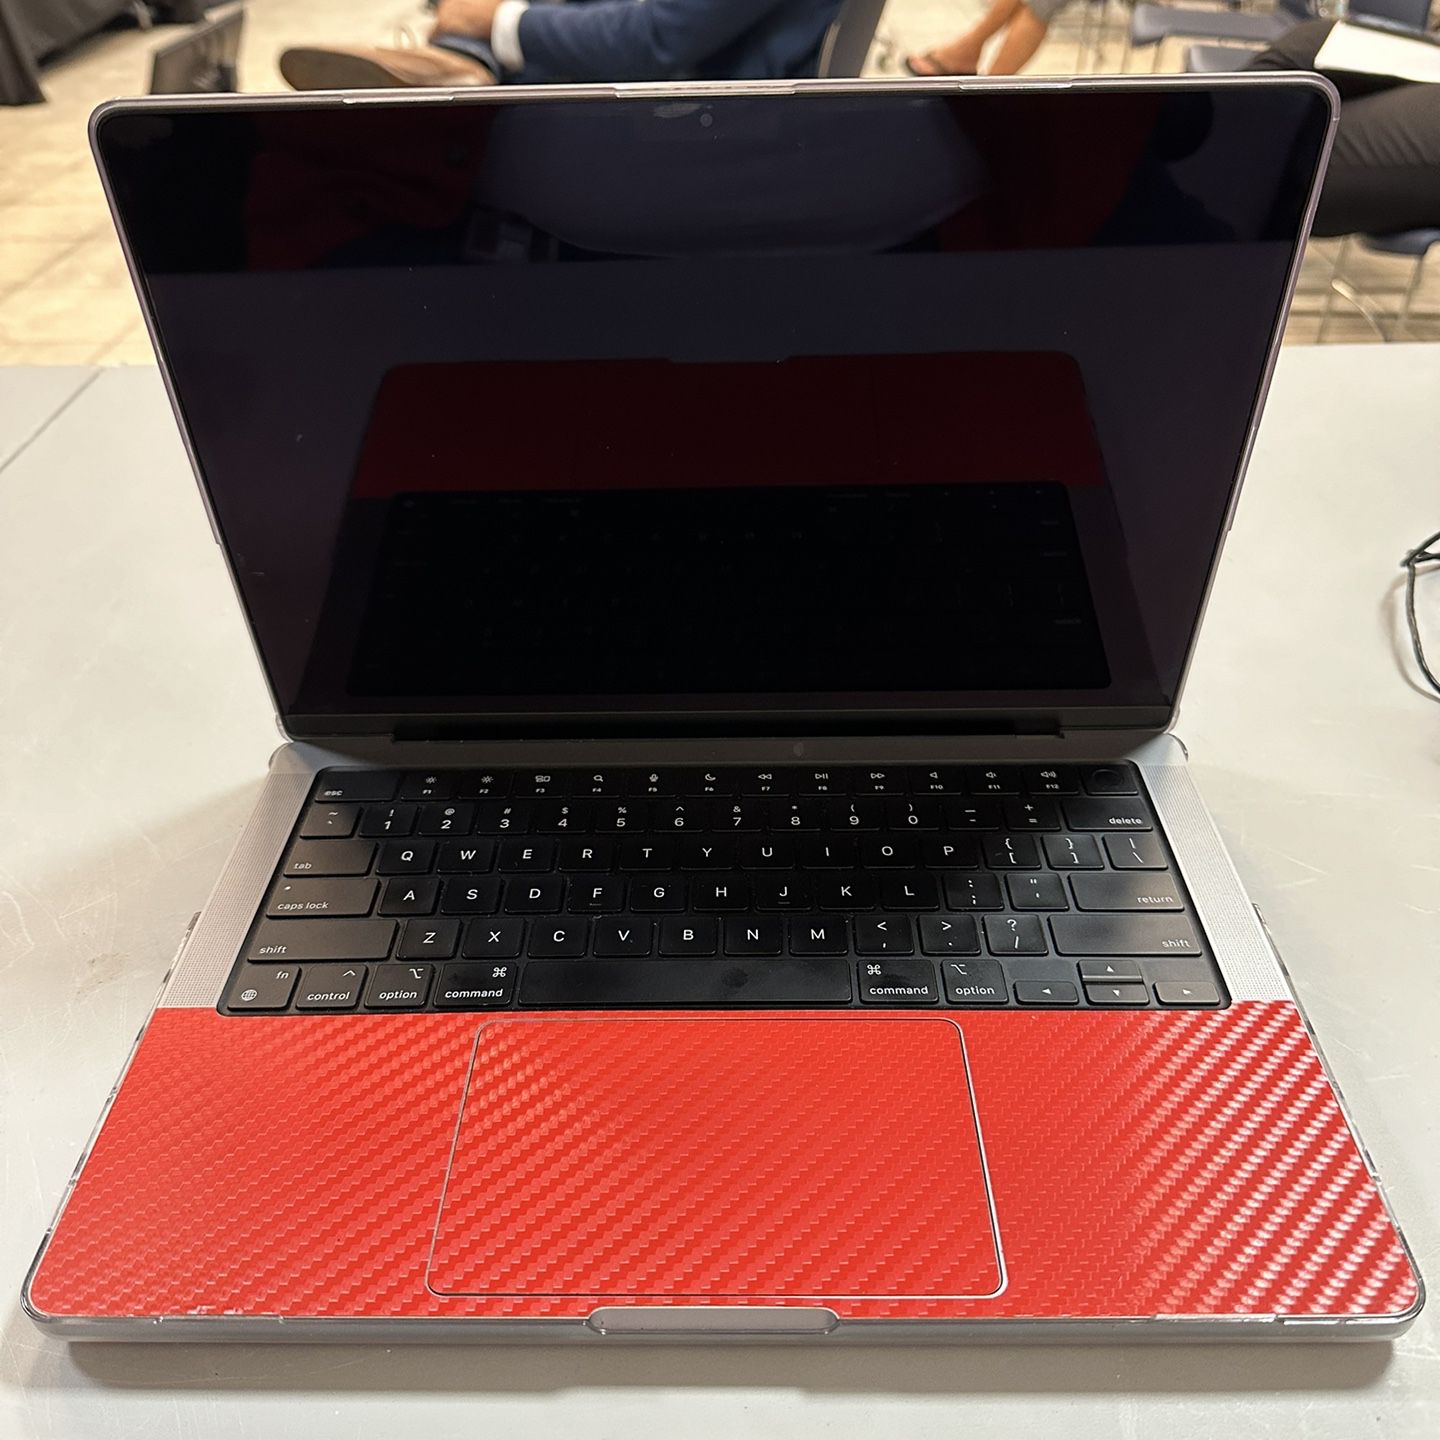 MacBook Pro M1 - Wrapped in Red